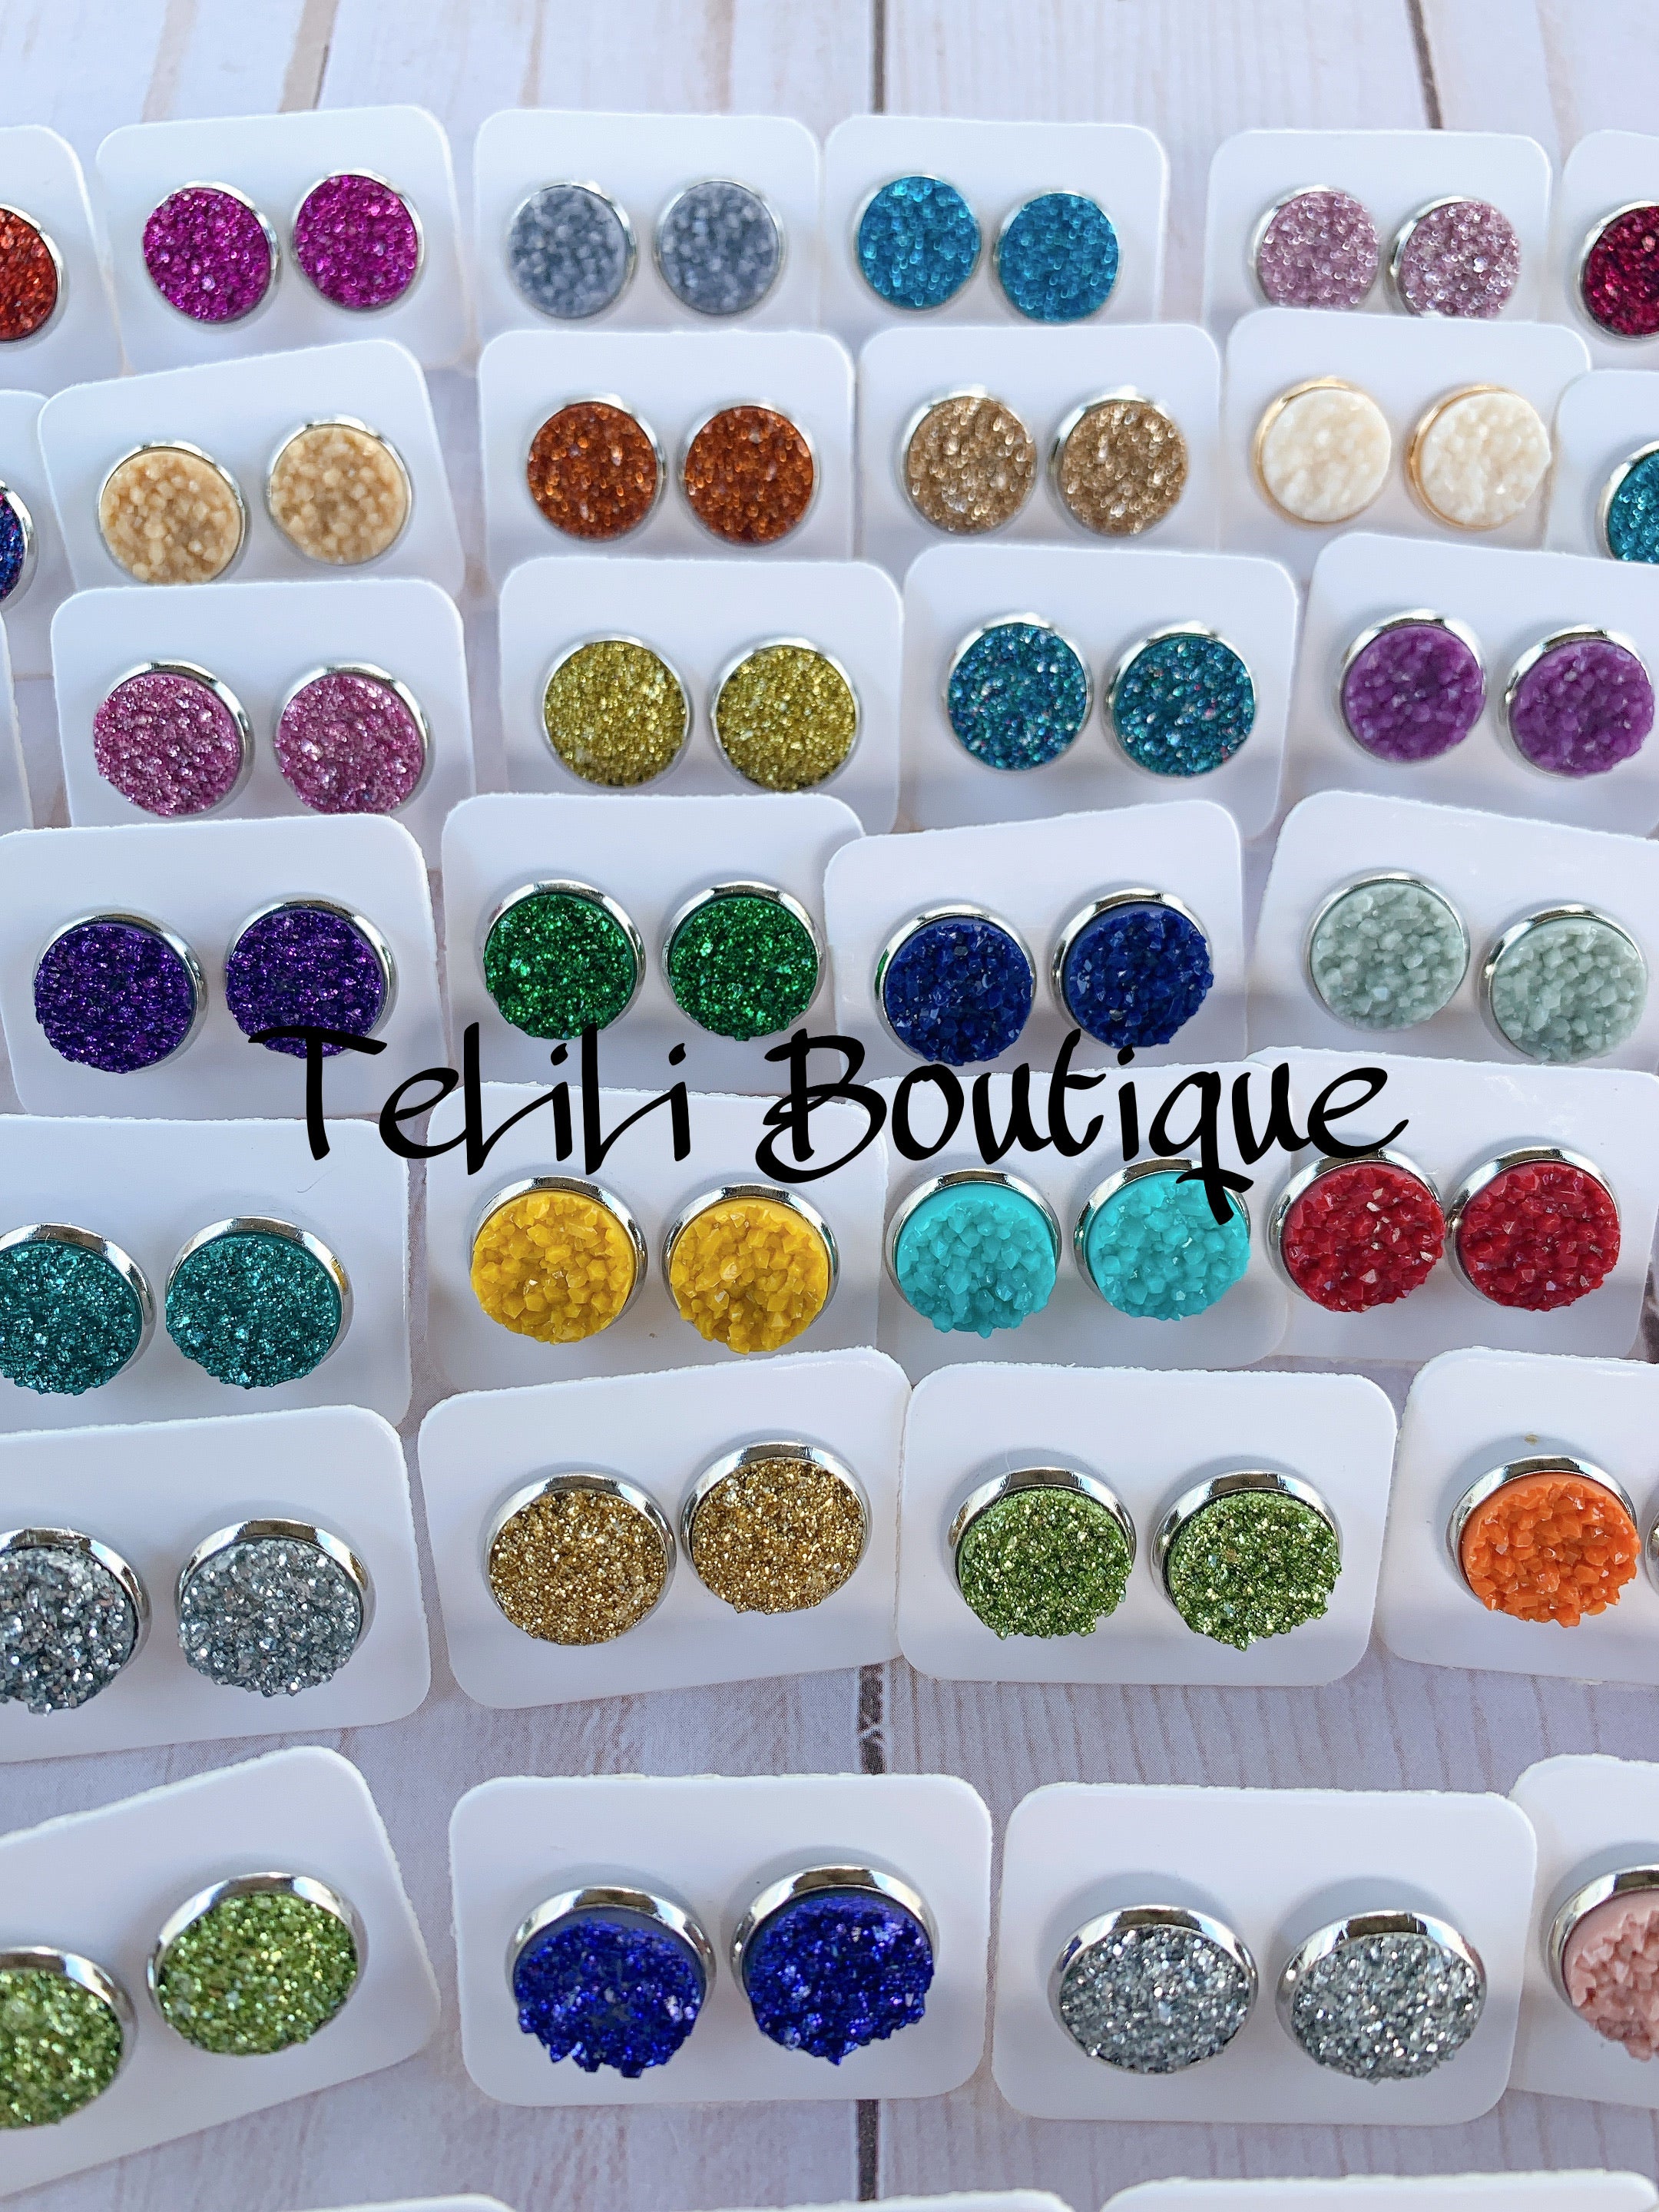 Druzy Fall Stud Earring Collection